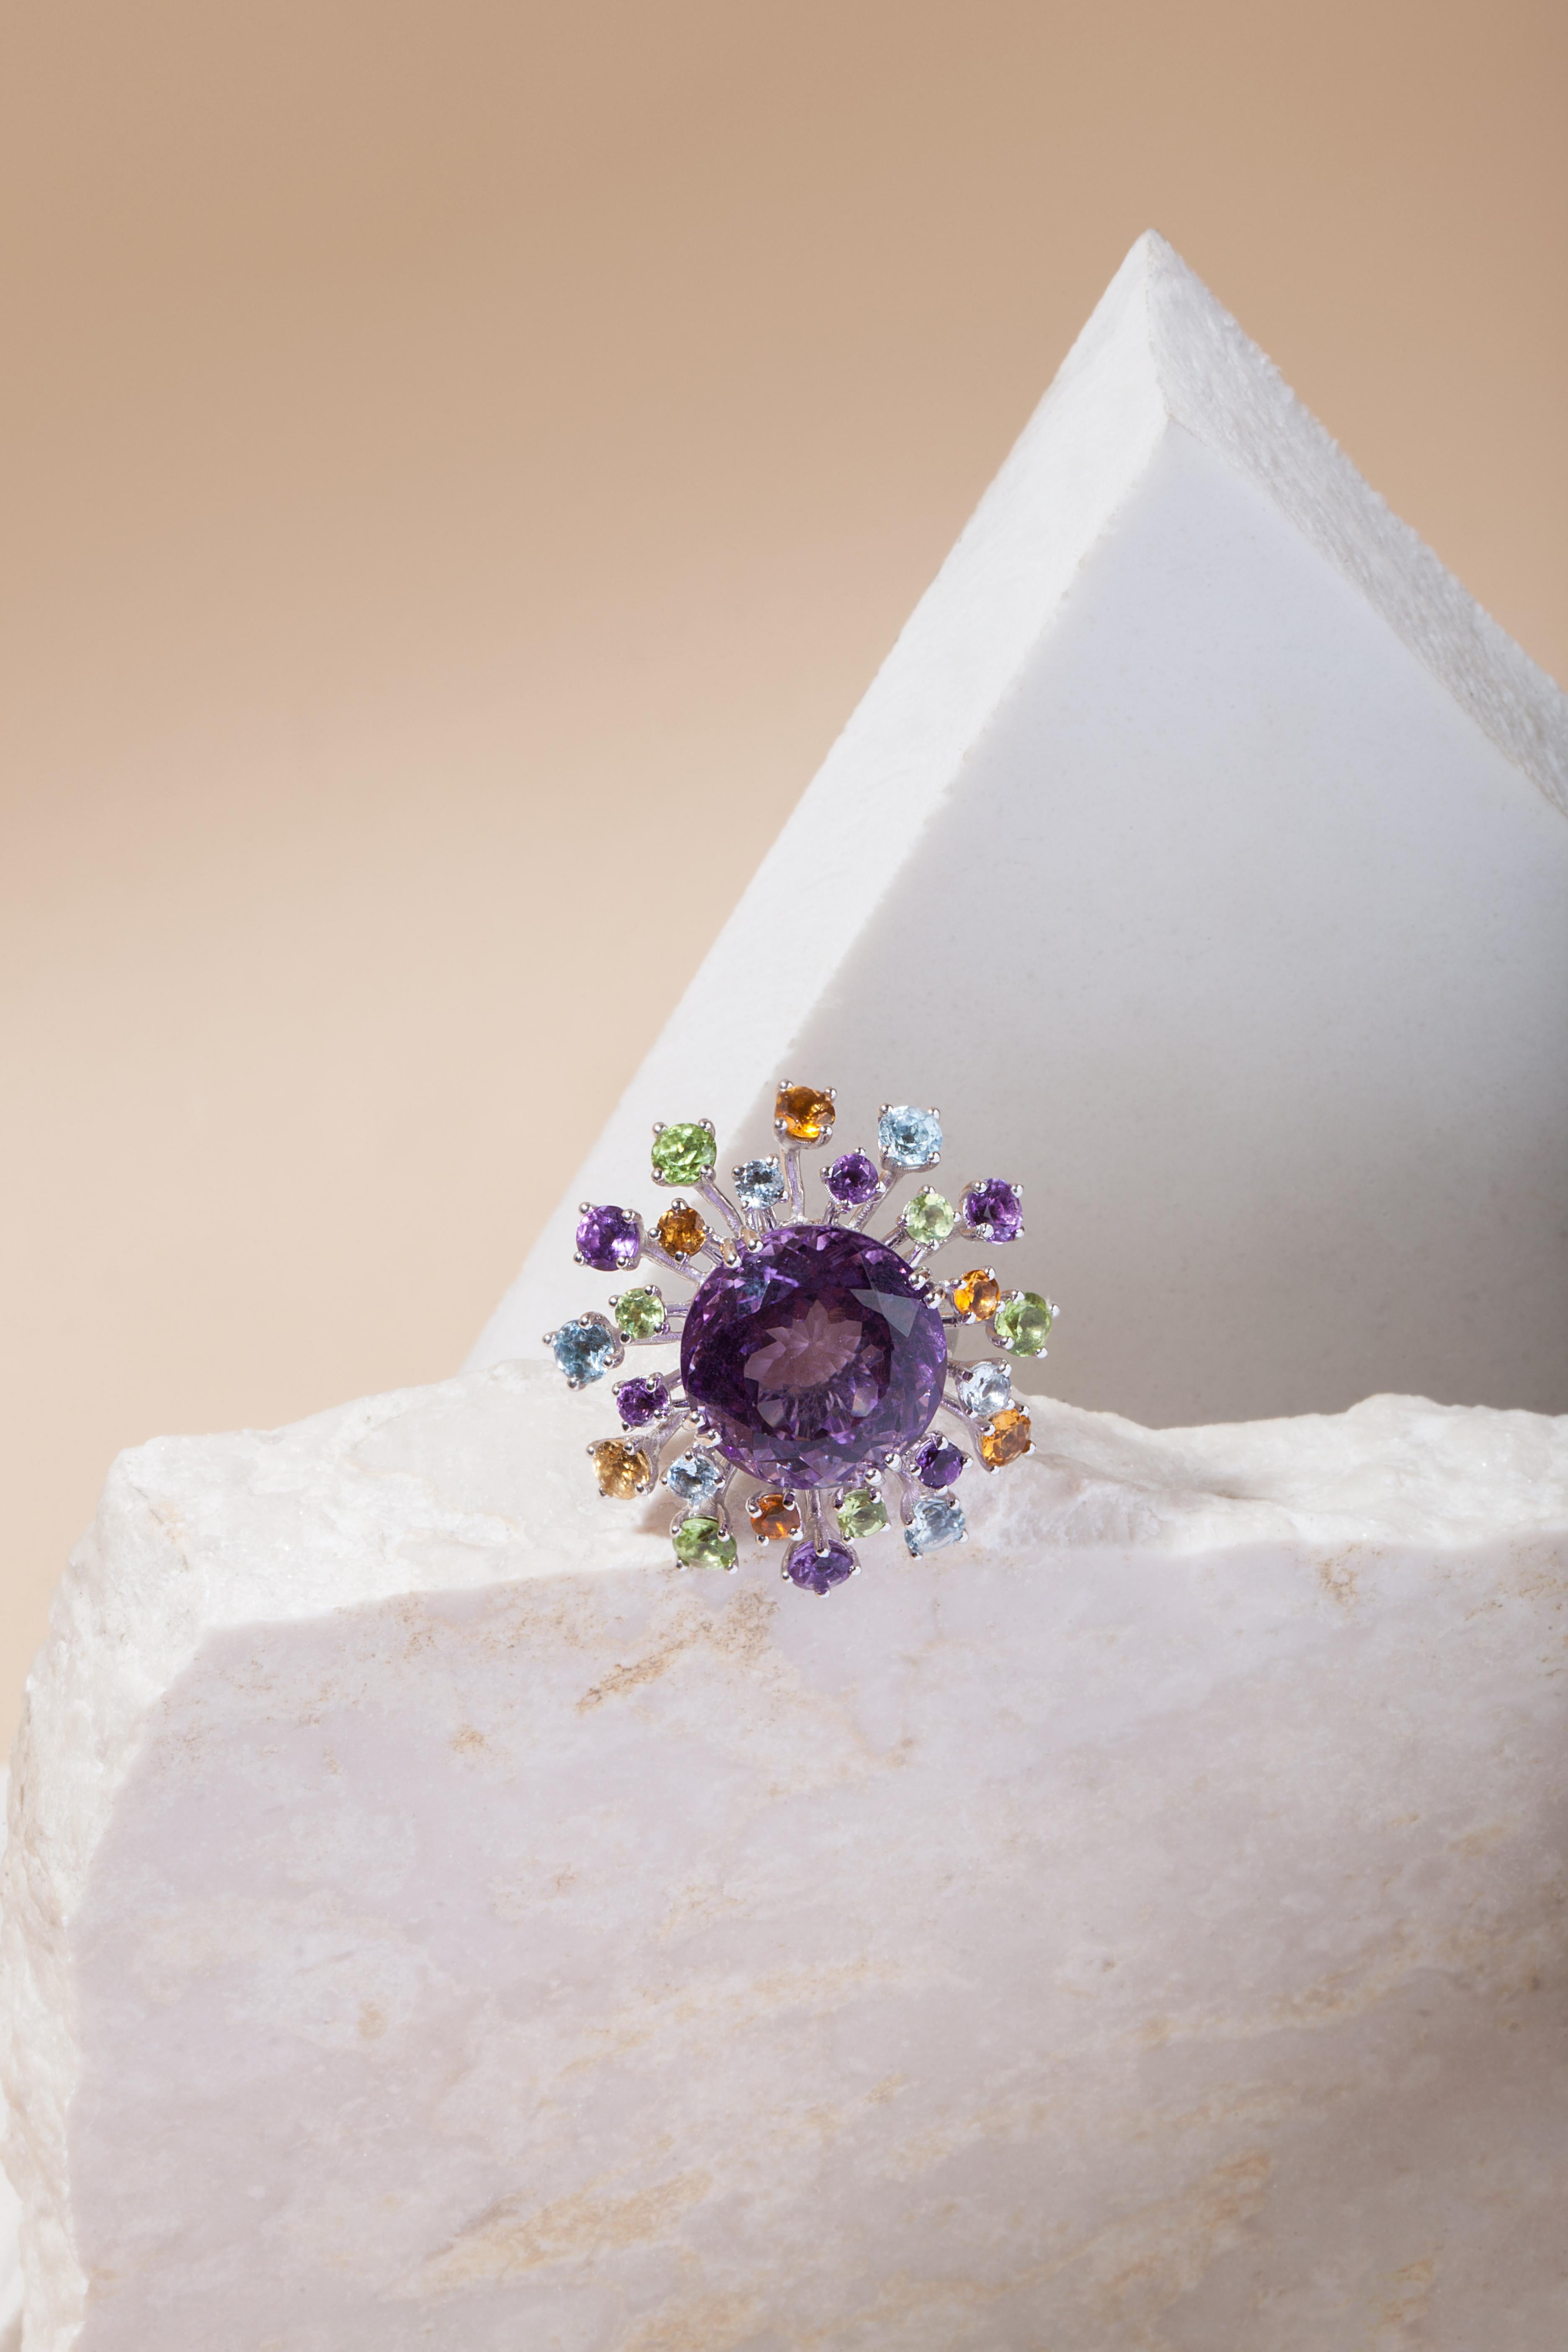 Amethyst Statement Ring - Aura Ring In New Condition For Sale In Doha, QA